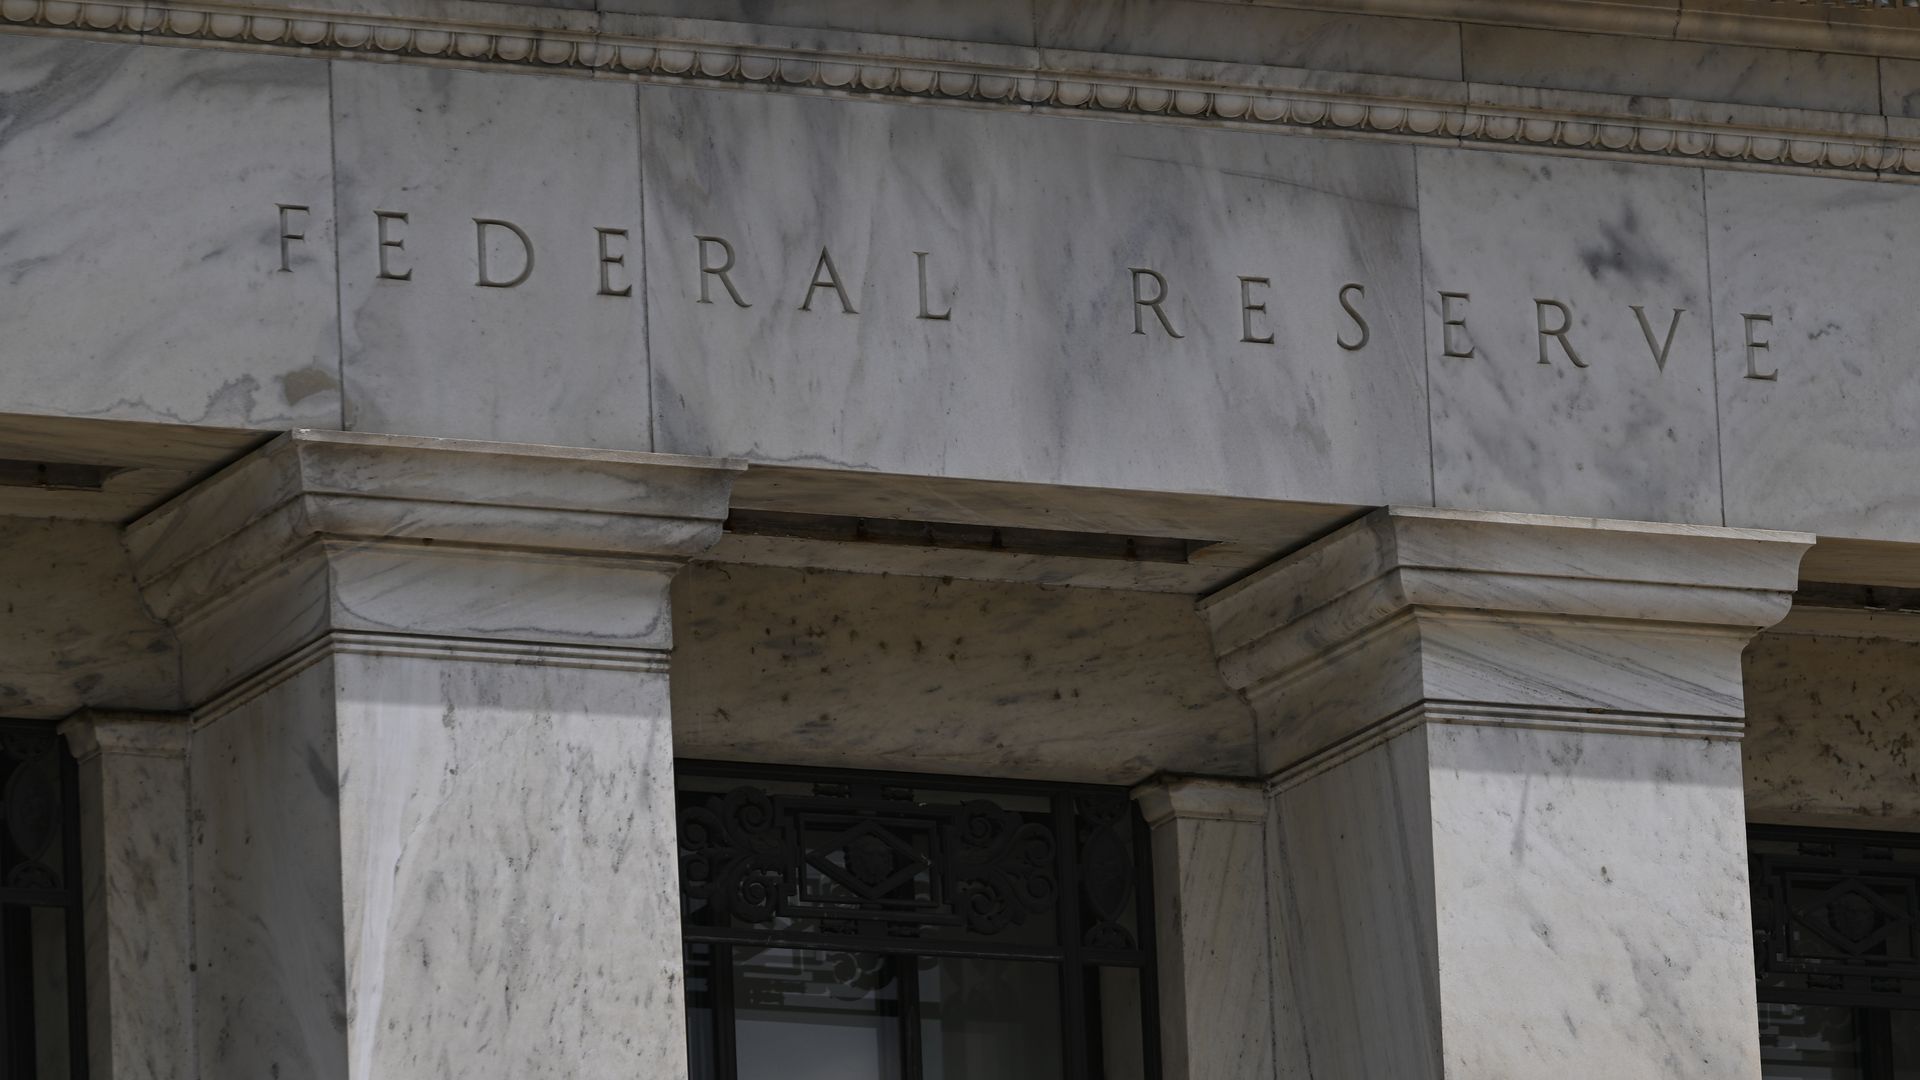 The Federal Reserve headquarters in Washington